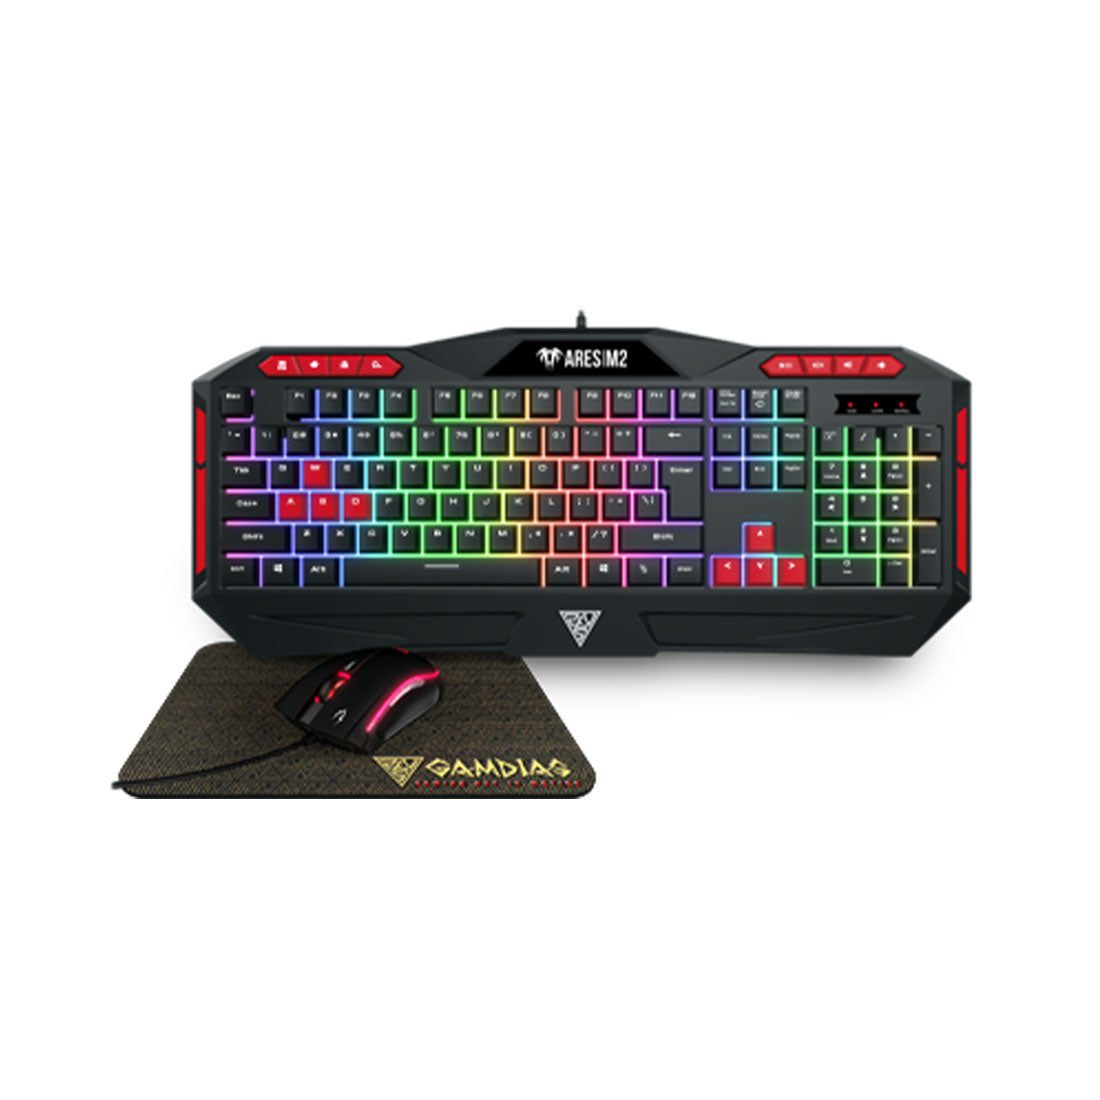 Gamdias ARES M2 Gaming Keyboard Zeus E2 Optical Gaming Mouse and MousePad Combo